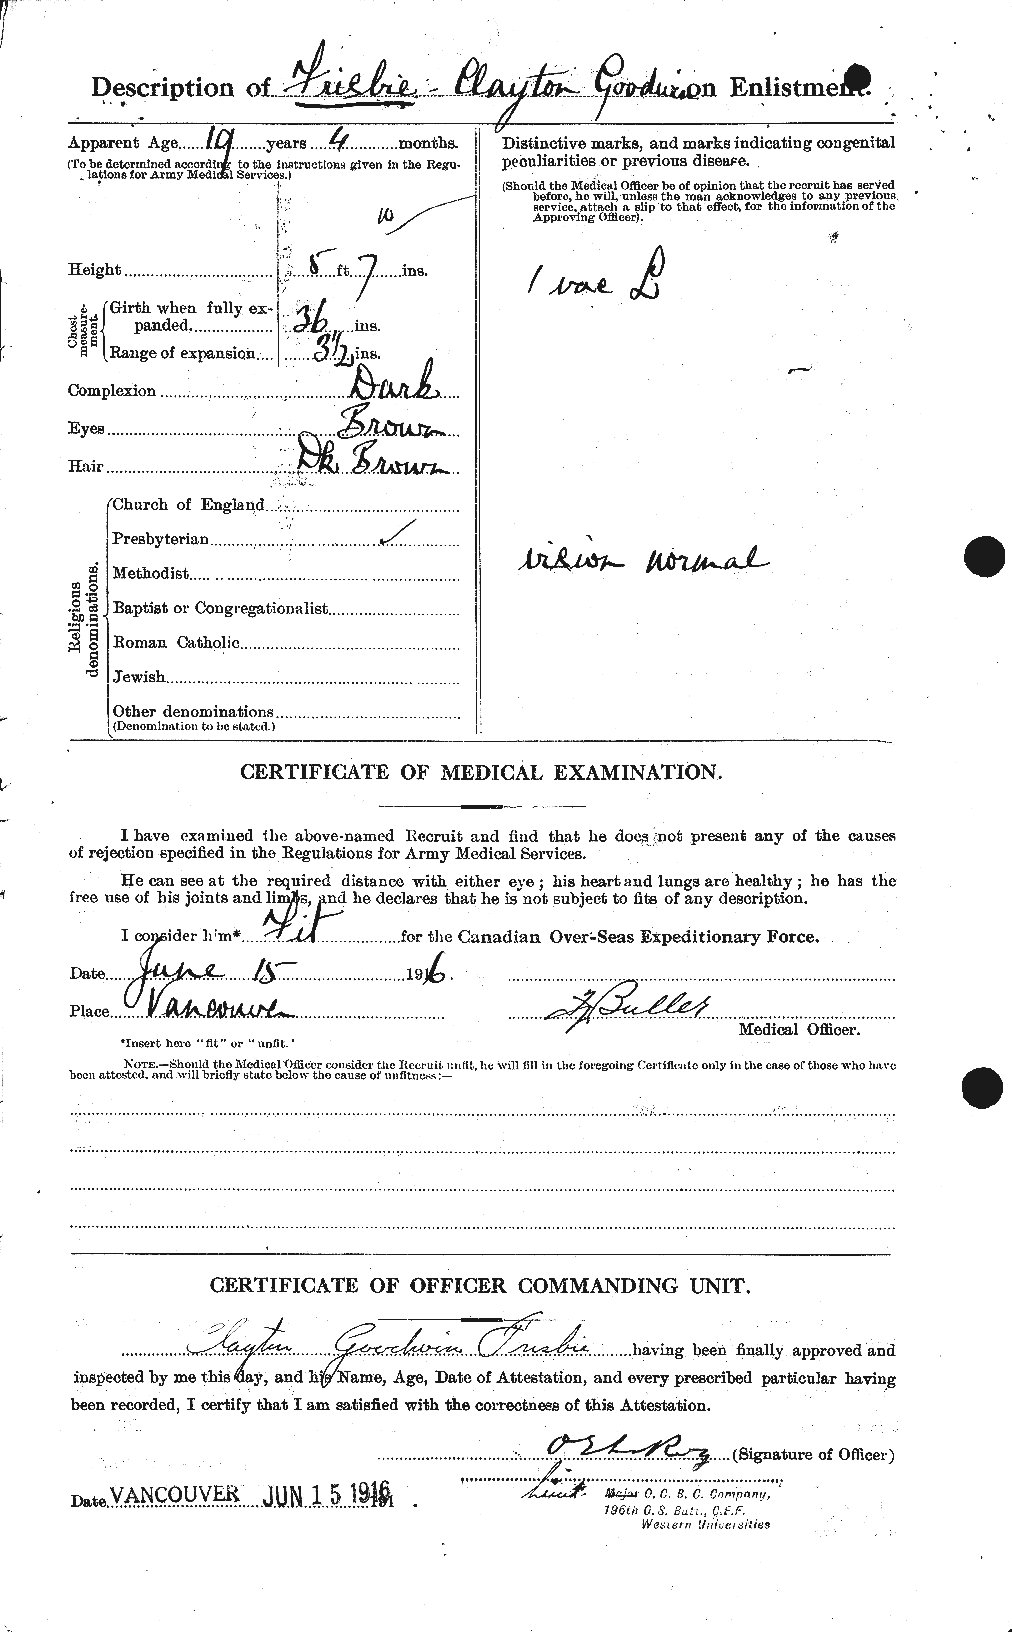 Personnel Records of the First World War - CEF 337450b